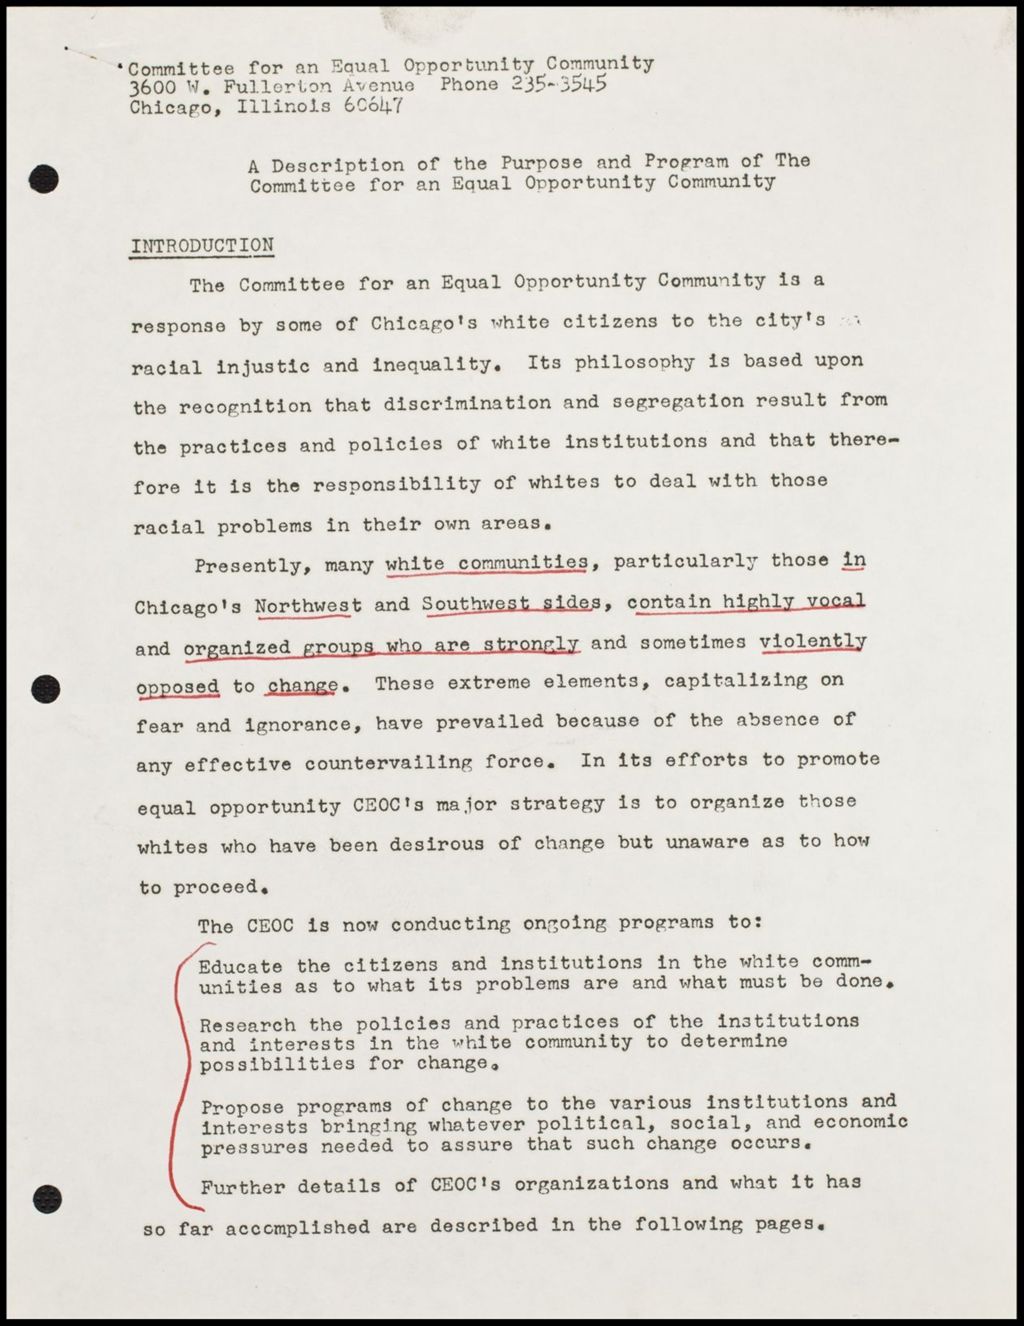 Miniature of Committee for an Equal Opportunity Community, 1968-1969 (Folder IV-1125)